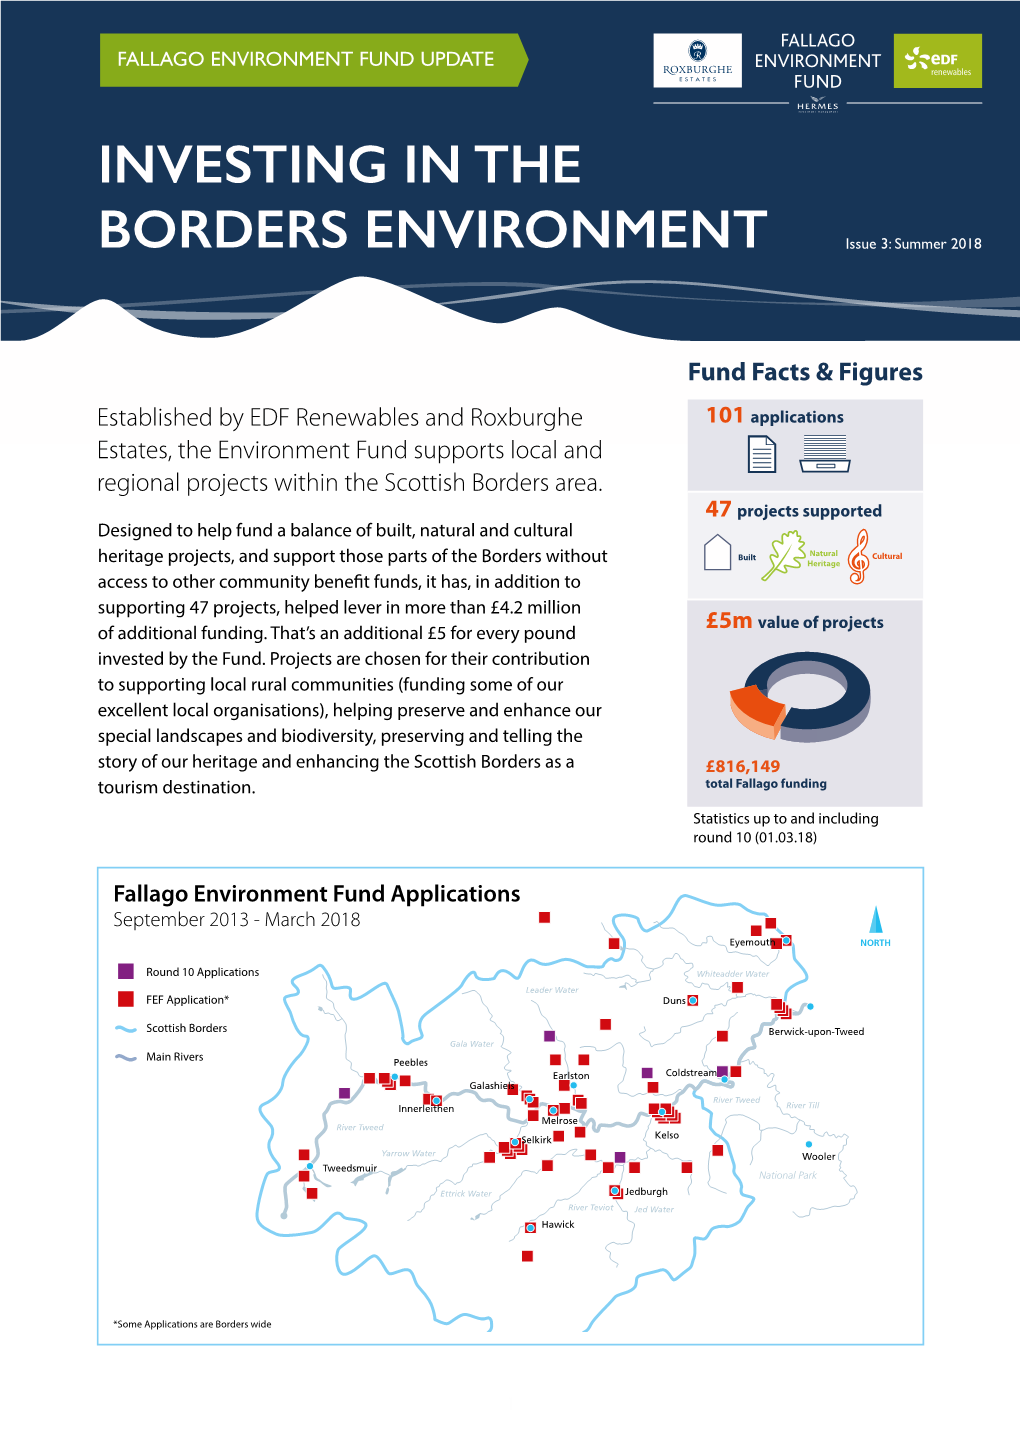 INVESTING in the BORDERS ENVIRONMENT Issue 3: Summer 2018